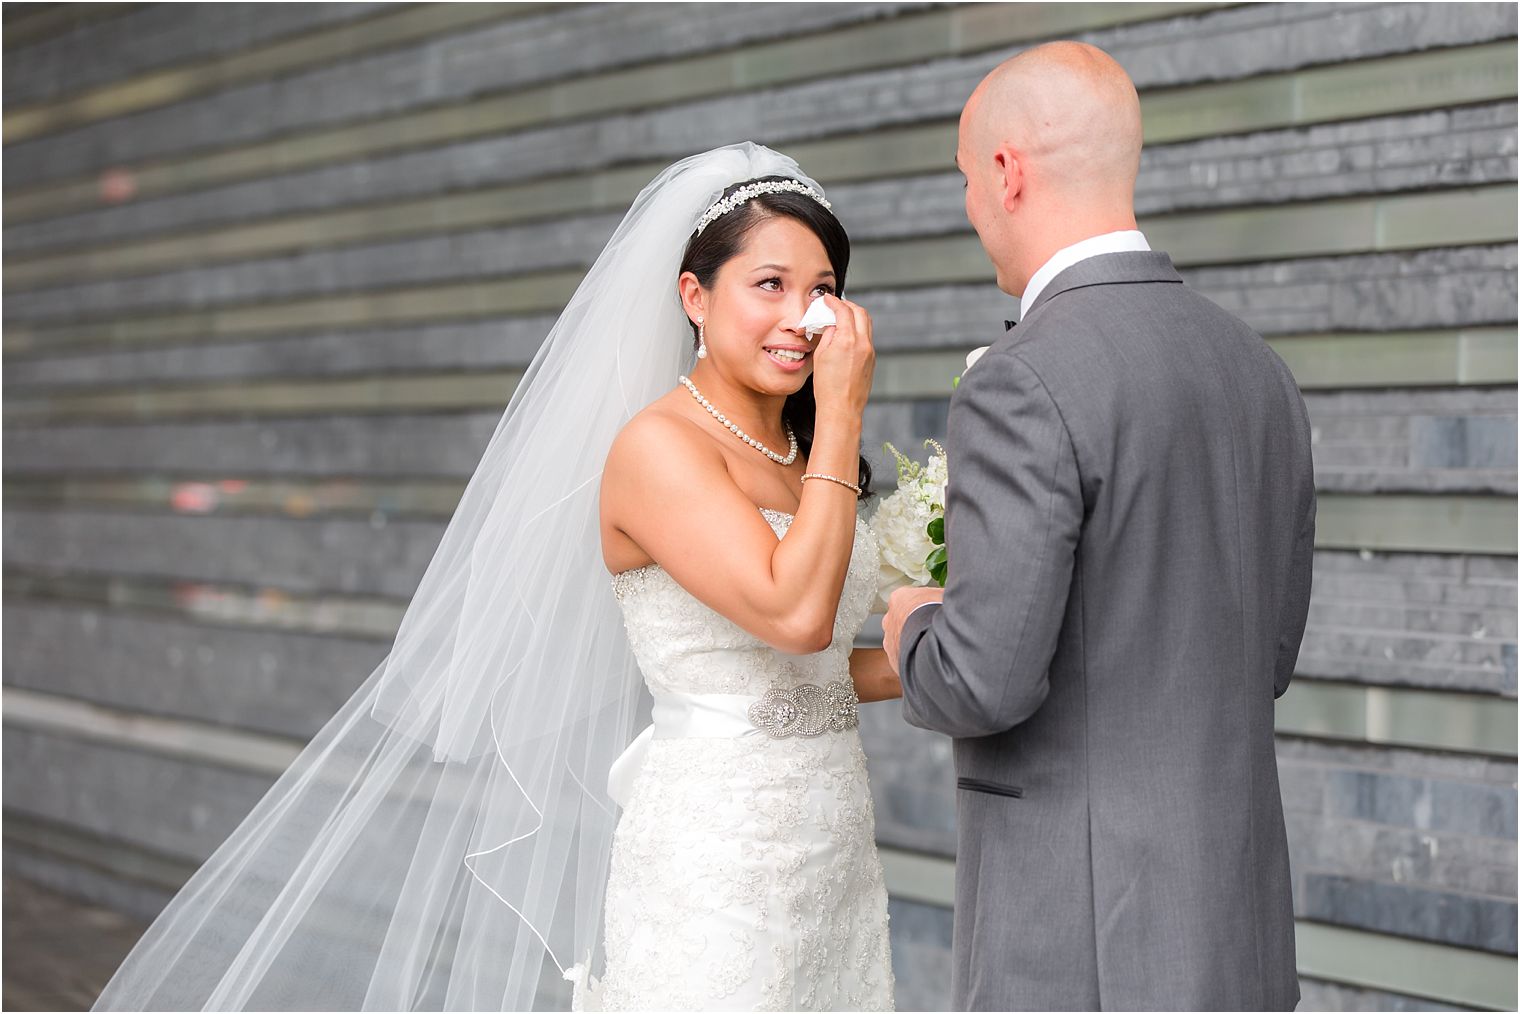 Tearful bride at first look